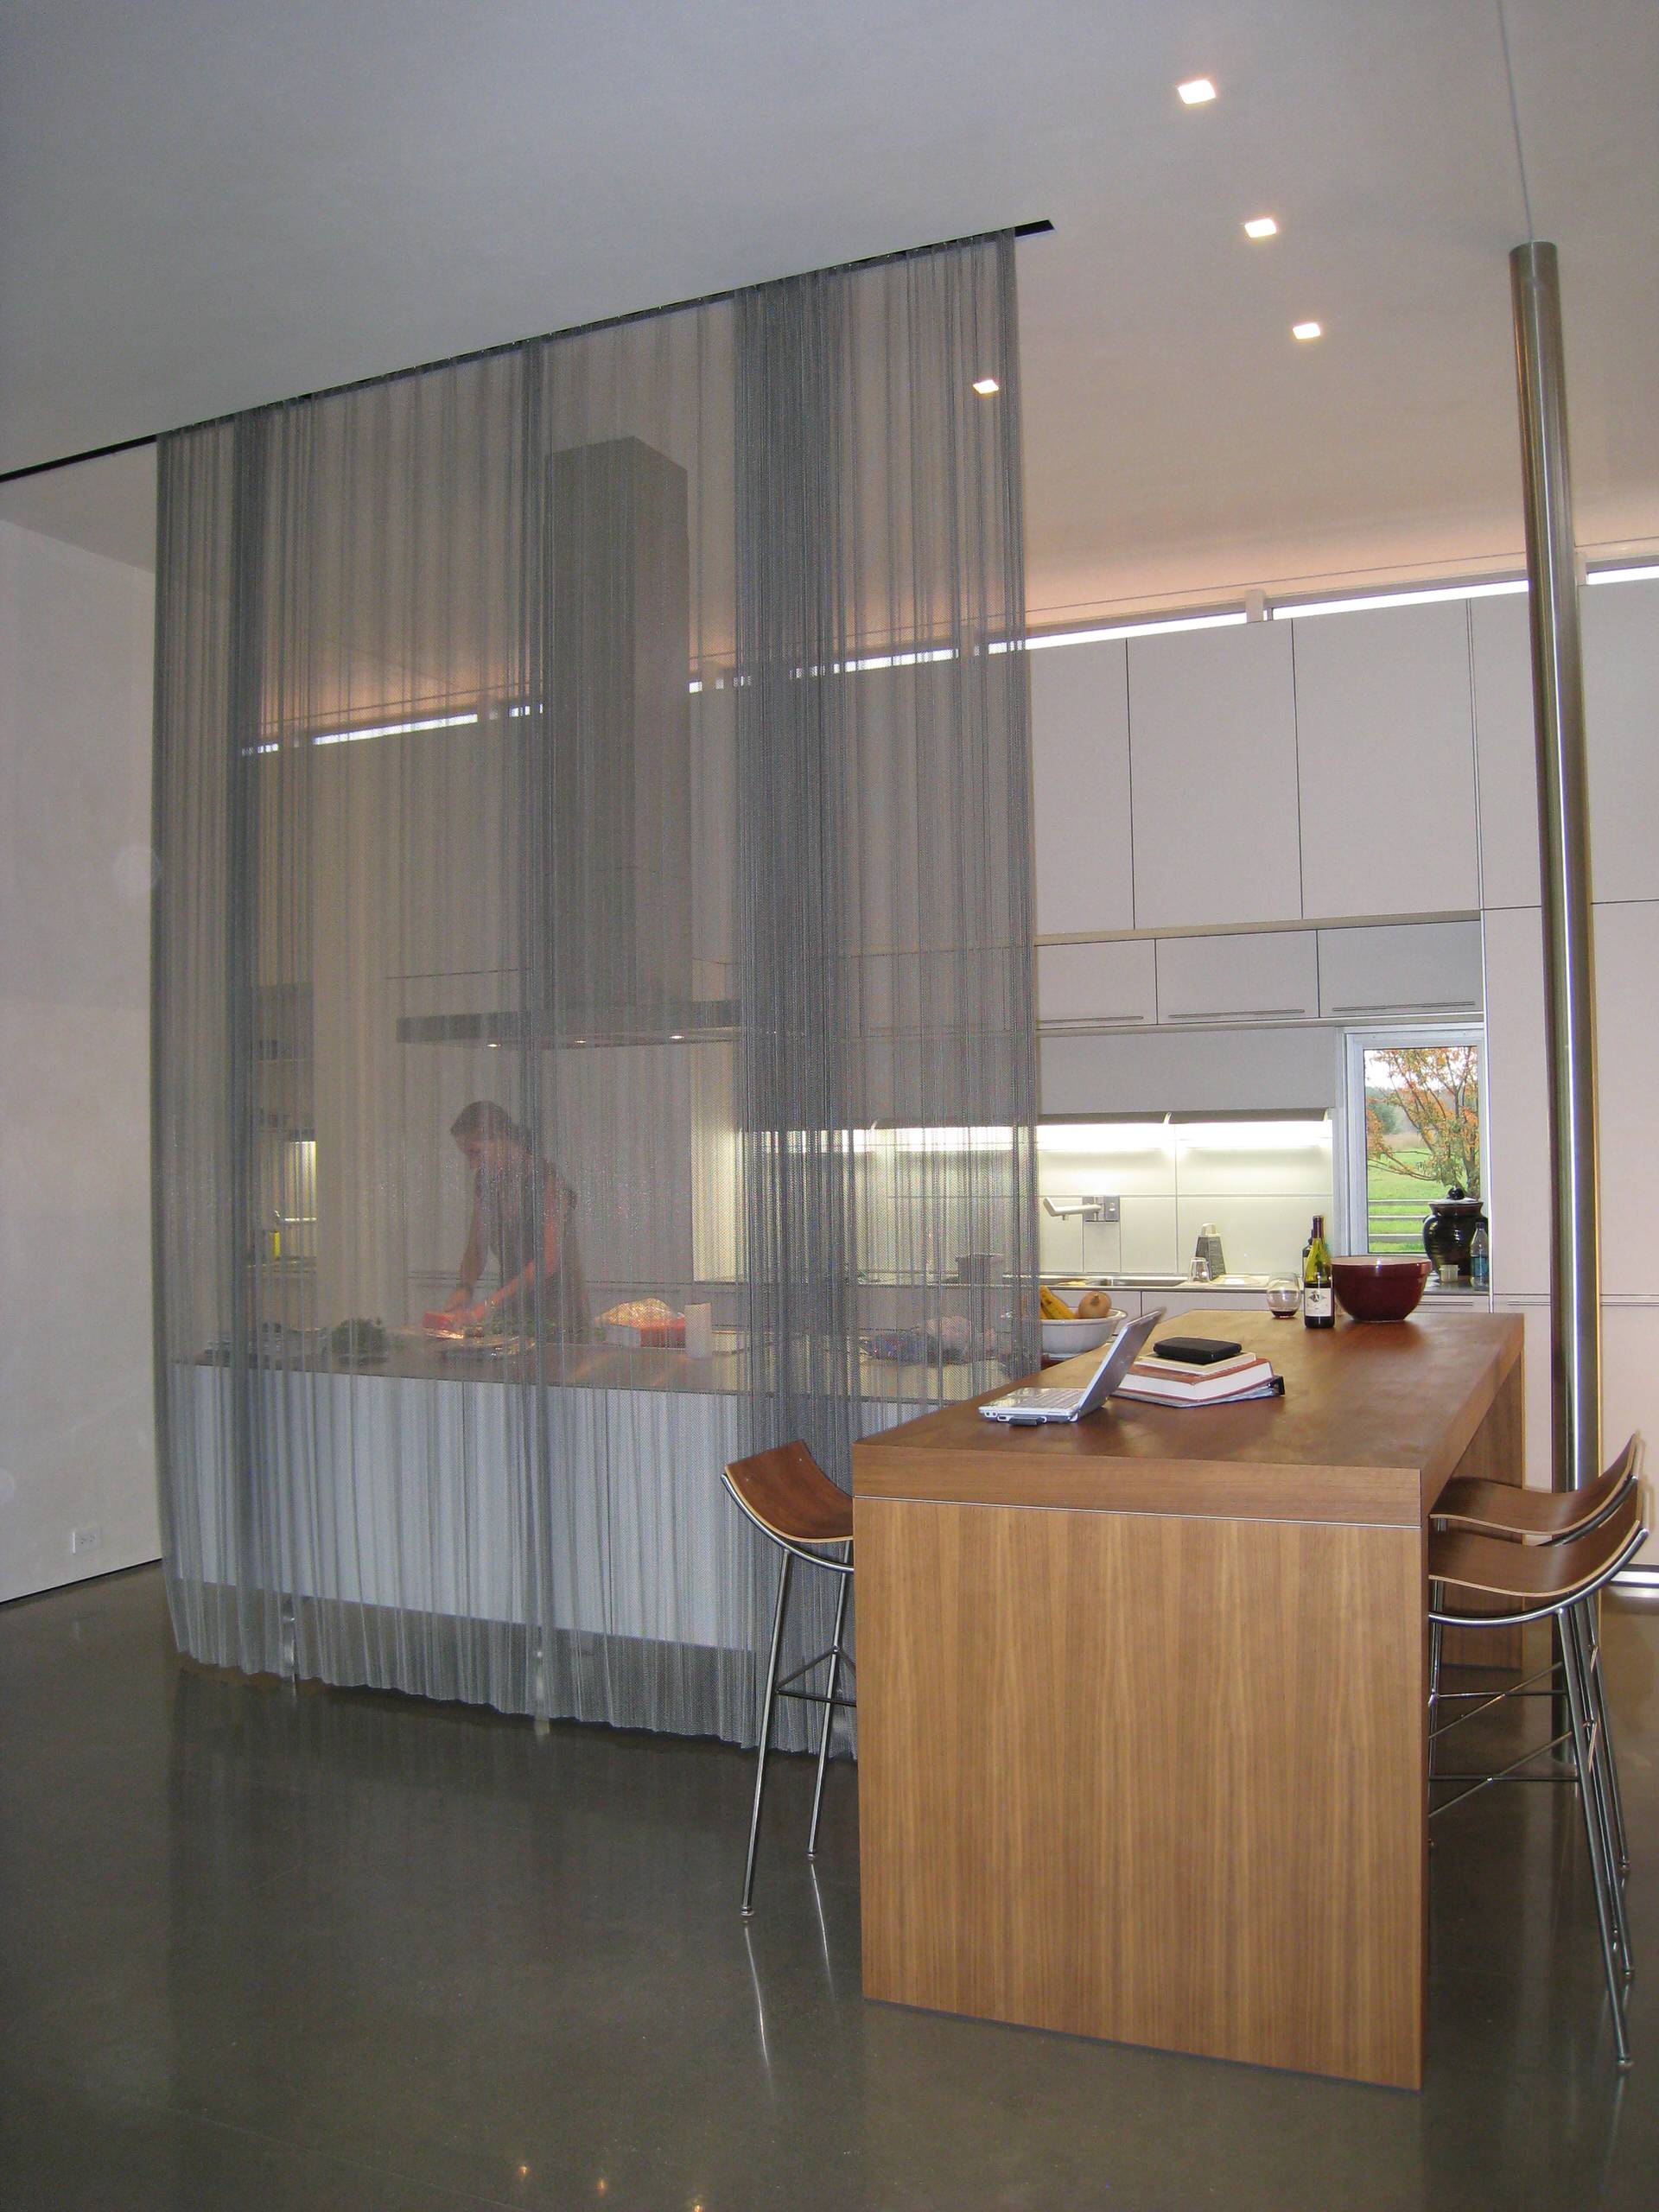 Woven Wire Metal Room Divider - Modern - Kitchen - Portland - by Cascade  Coil Drapery | Houzz